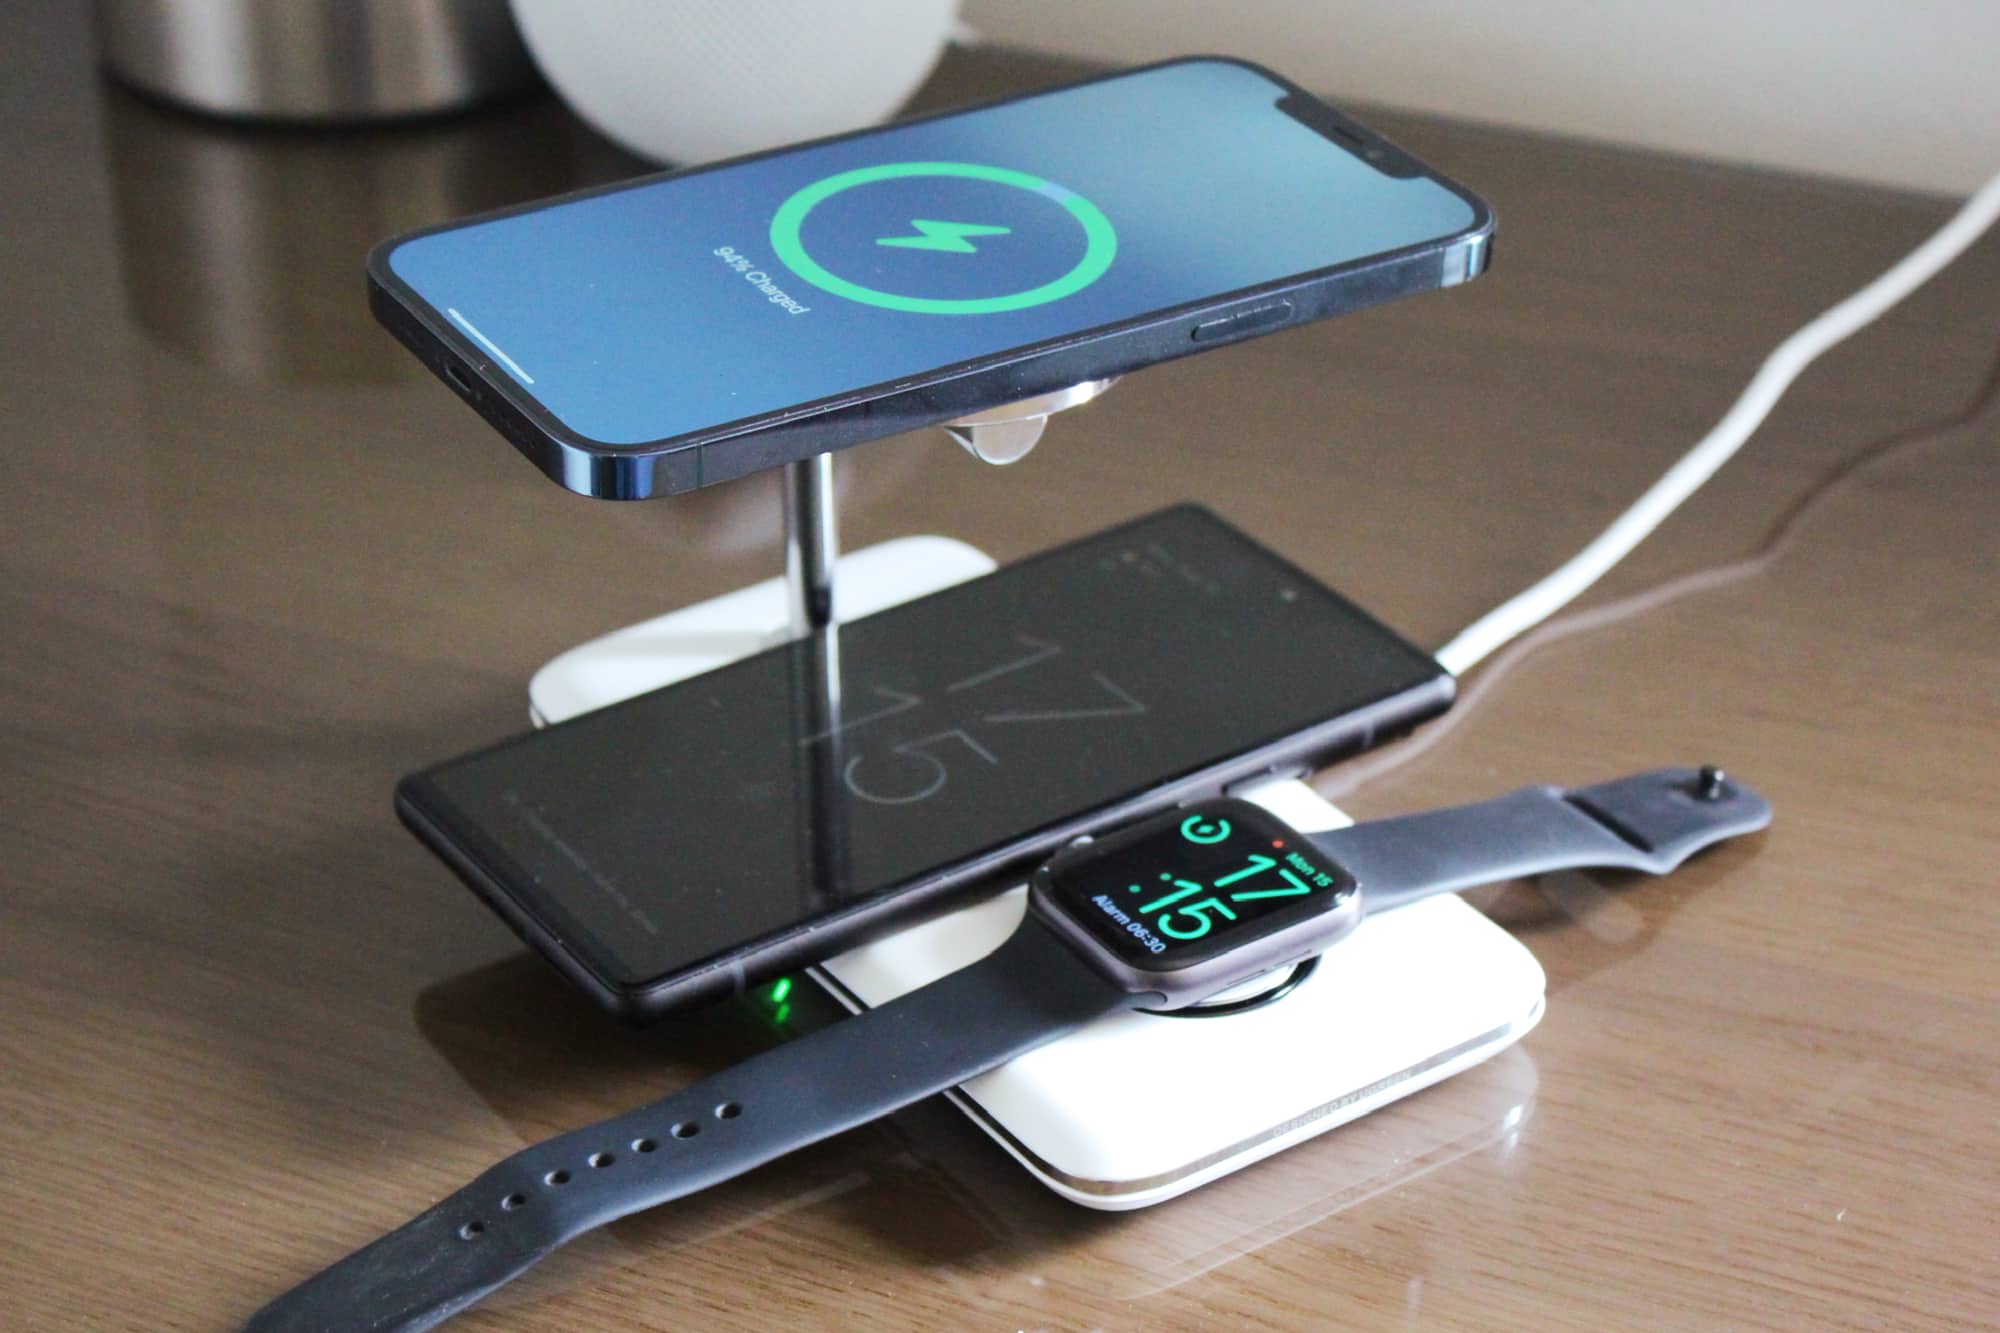 https://www.digitaltrends.com/wp-content/uploads/2022/08/Ugreen-3-in-1-MagSafe-charging-stand-with-iPhone-12-Pro-Max-and-Google-Pixel-6-charging-alongside-Apple-Watch.jpg?fit=720%2C479&p=1